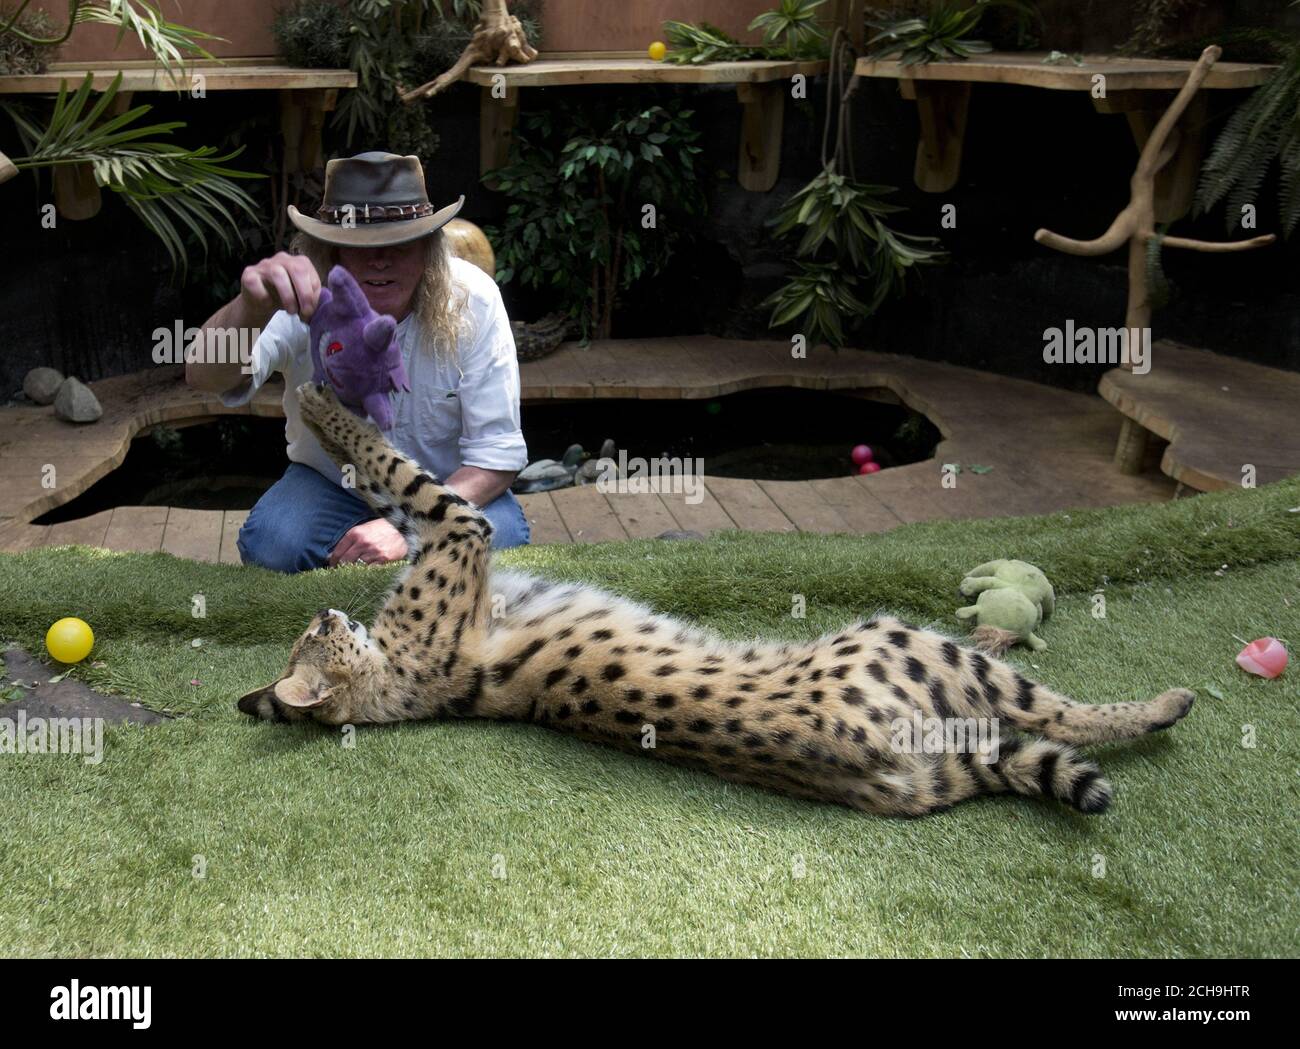 EMBARGOED TO 0001 MONDAY MAY 23 Iain Newby with his serval cat Squeaks, aged 1 1/2, at his home in Great Wakering, Essex, as lions, wolves and deadly venomous snakes are among thousands of dangerous animals being kept on private properties across the UK, figures have revealed. Stock Photo